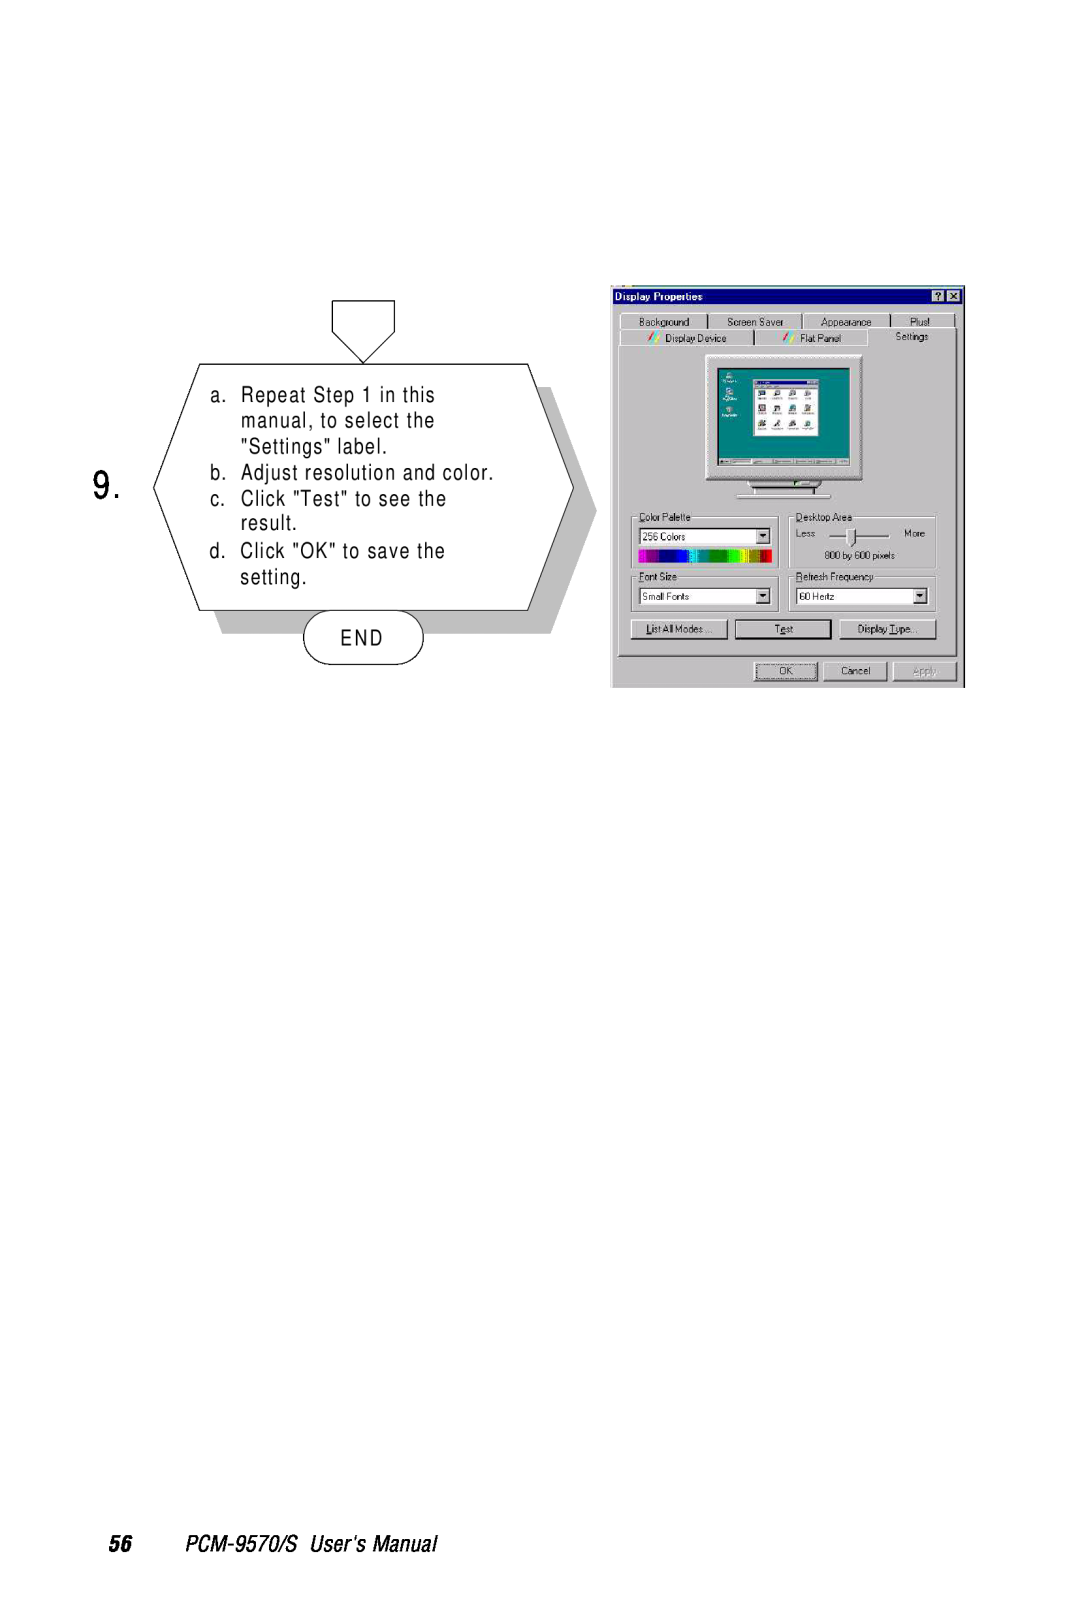 Advantech 2006957006 5th Edition a. Repeat in this manual, to select the Settings label, PCM-9570/S Users Manual 